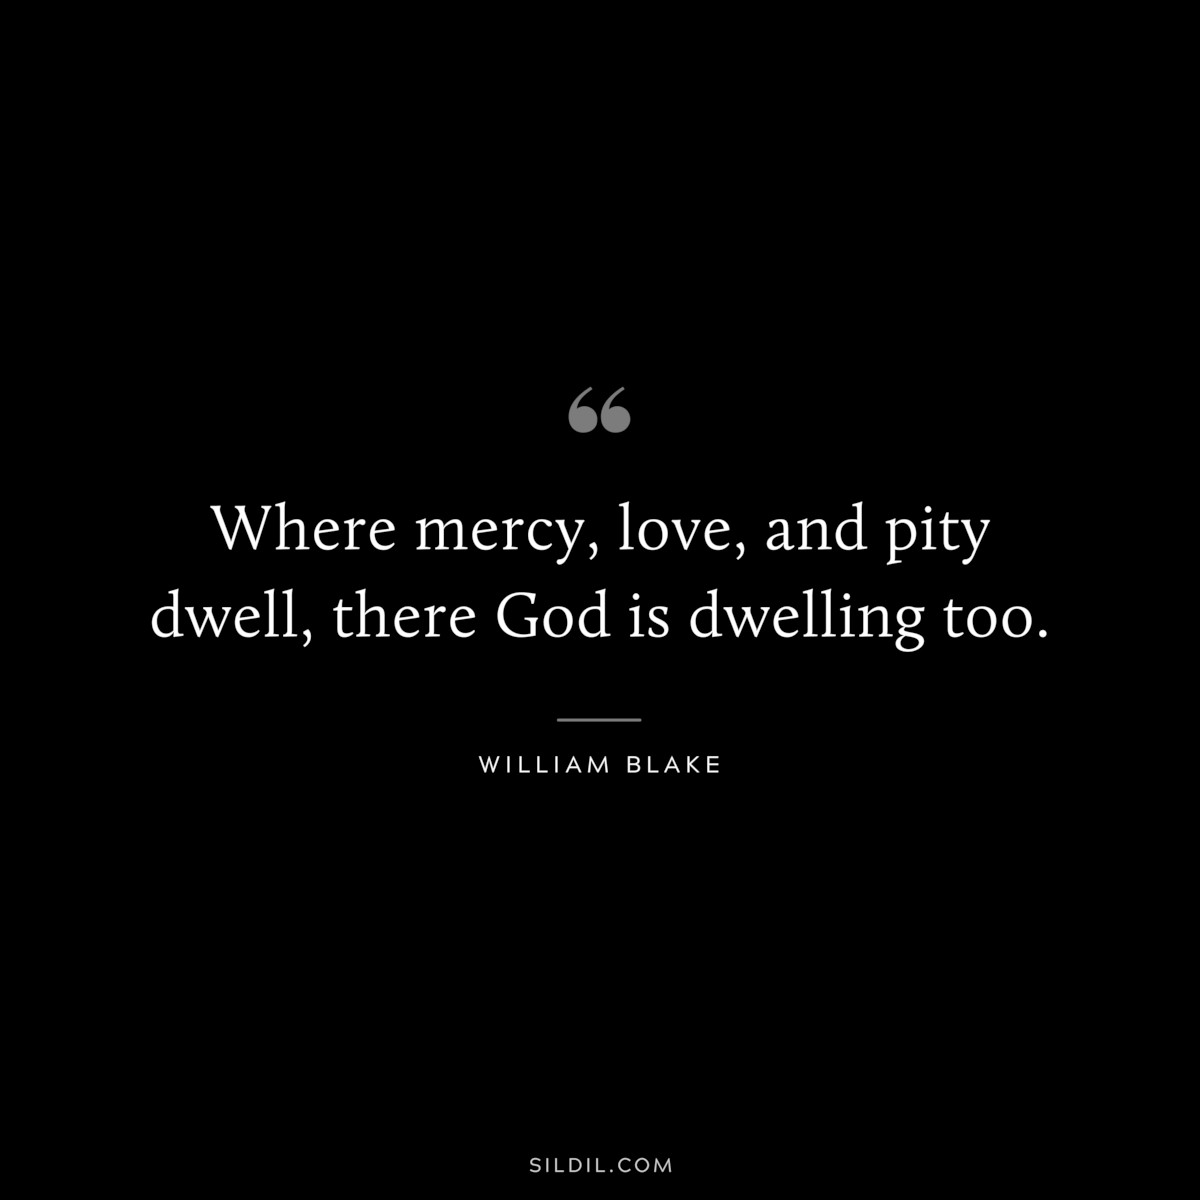 Where mercy, love, and pity dwell, there God is dwelling too. ― William Blake